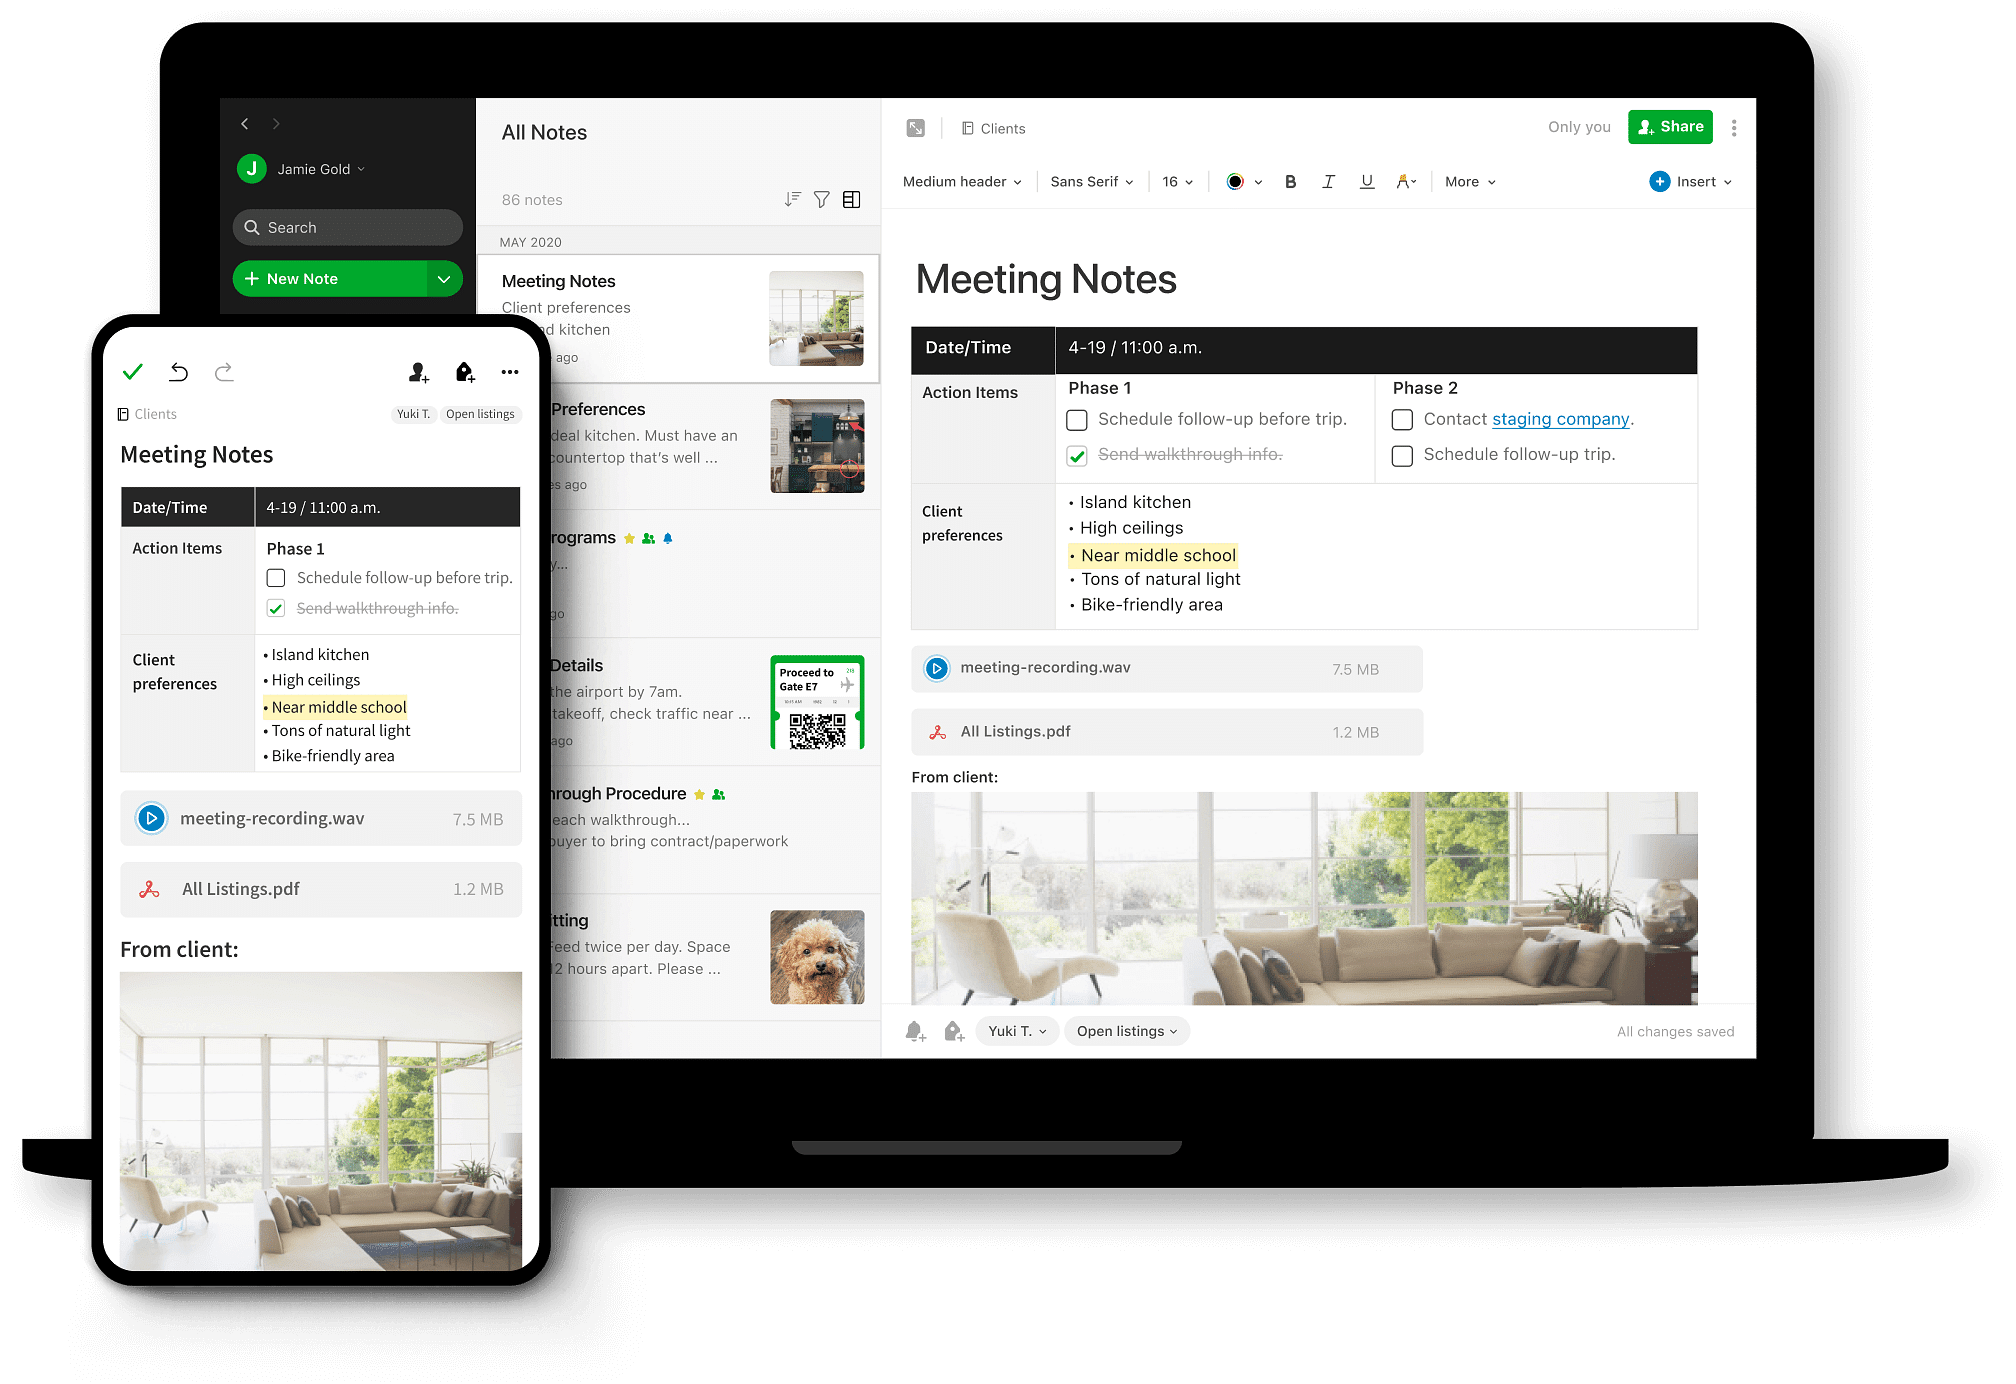 Evernote note taking app interface syncs across desktop and mobile